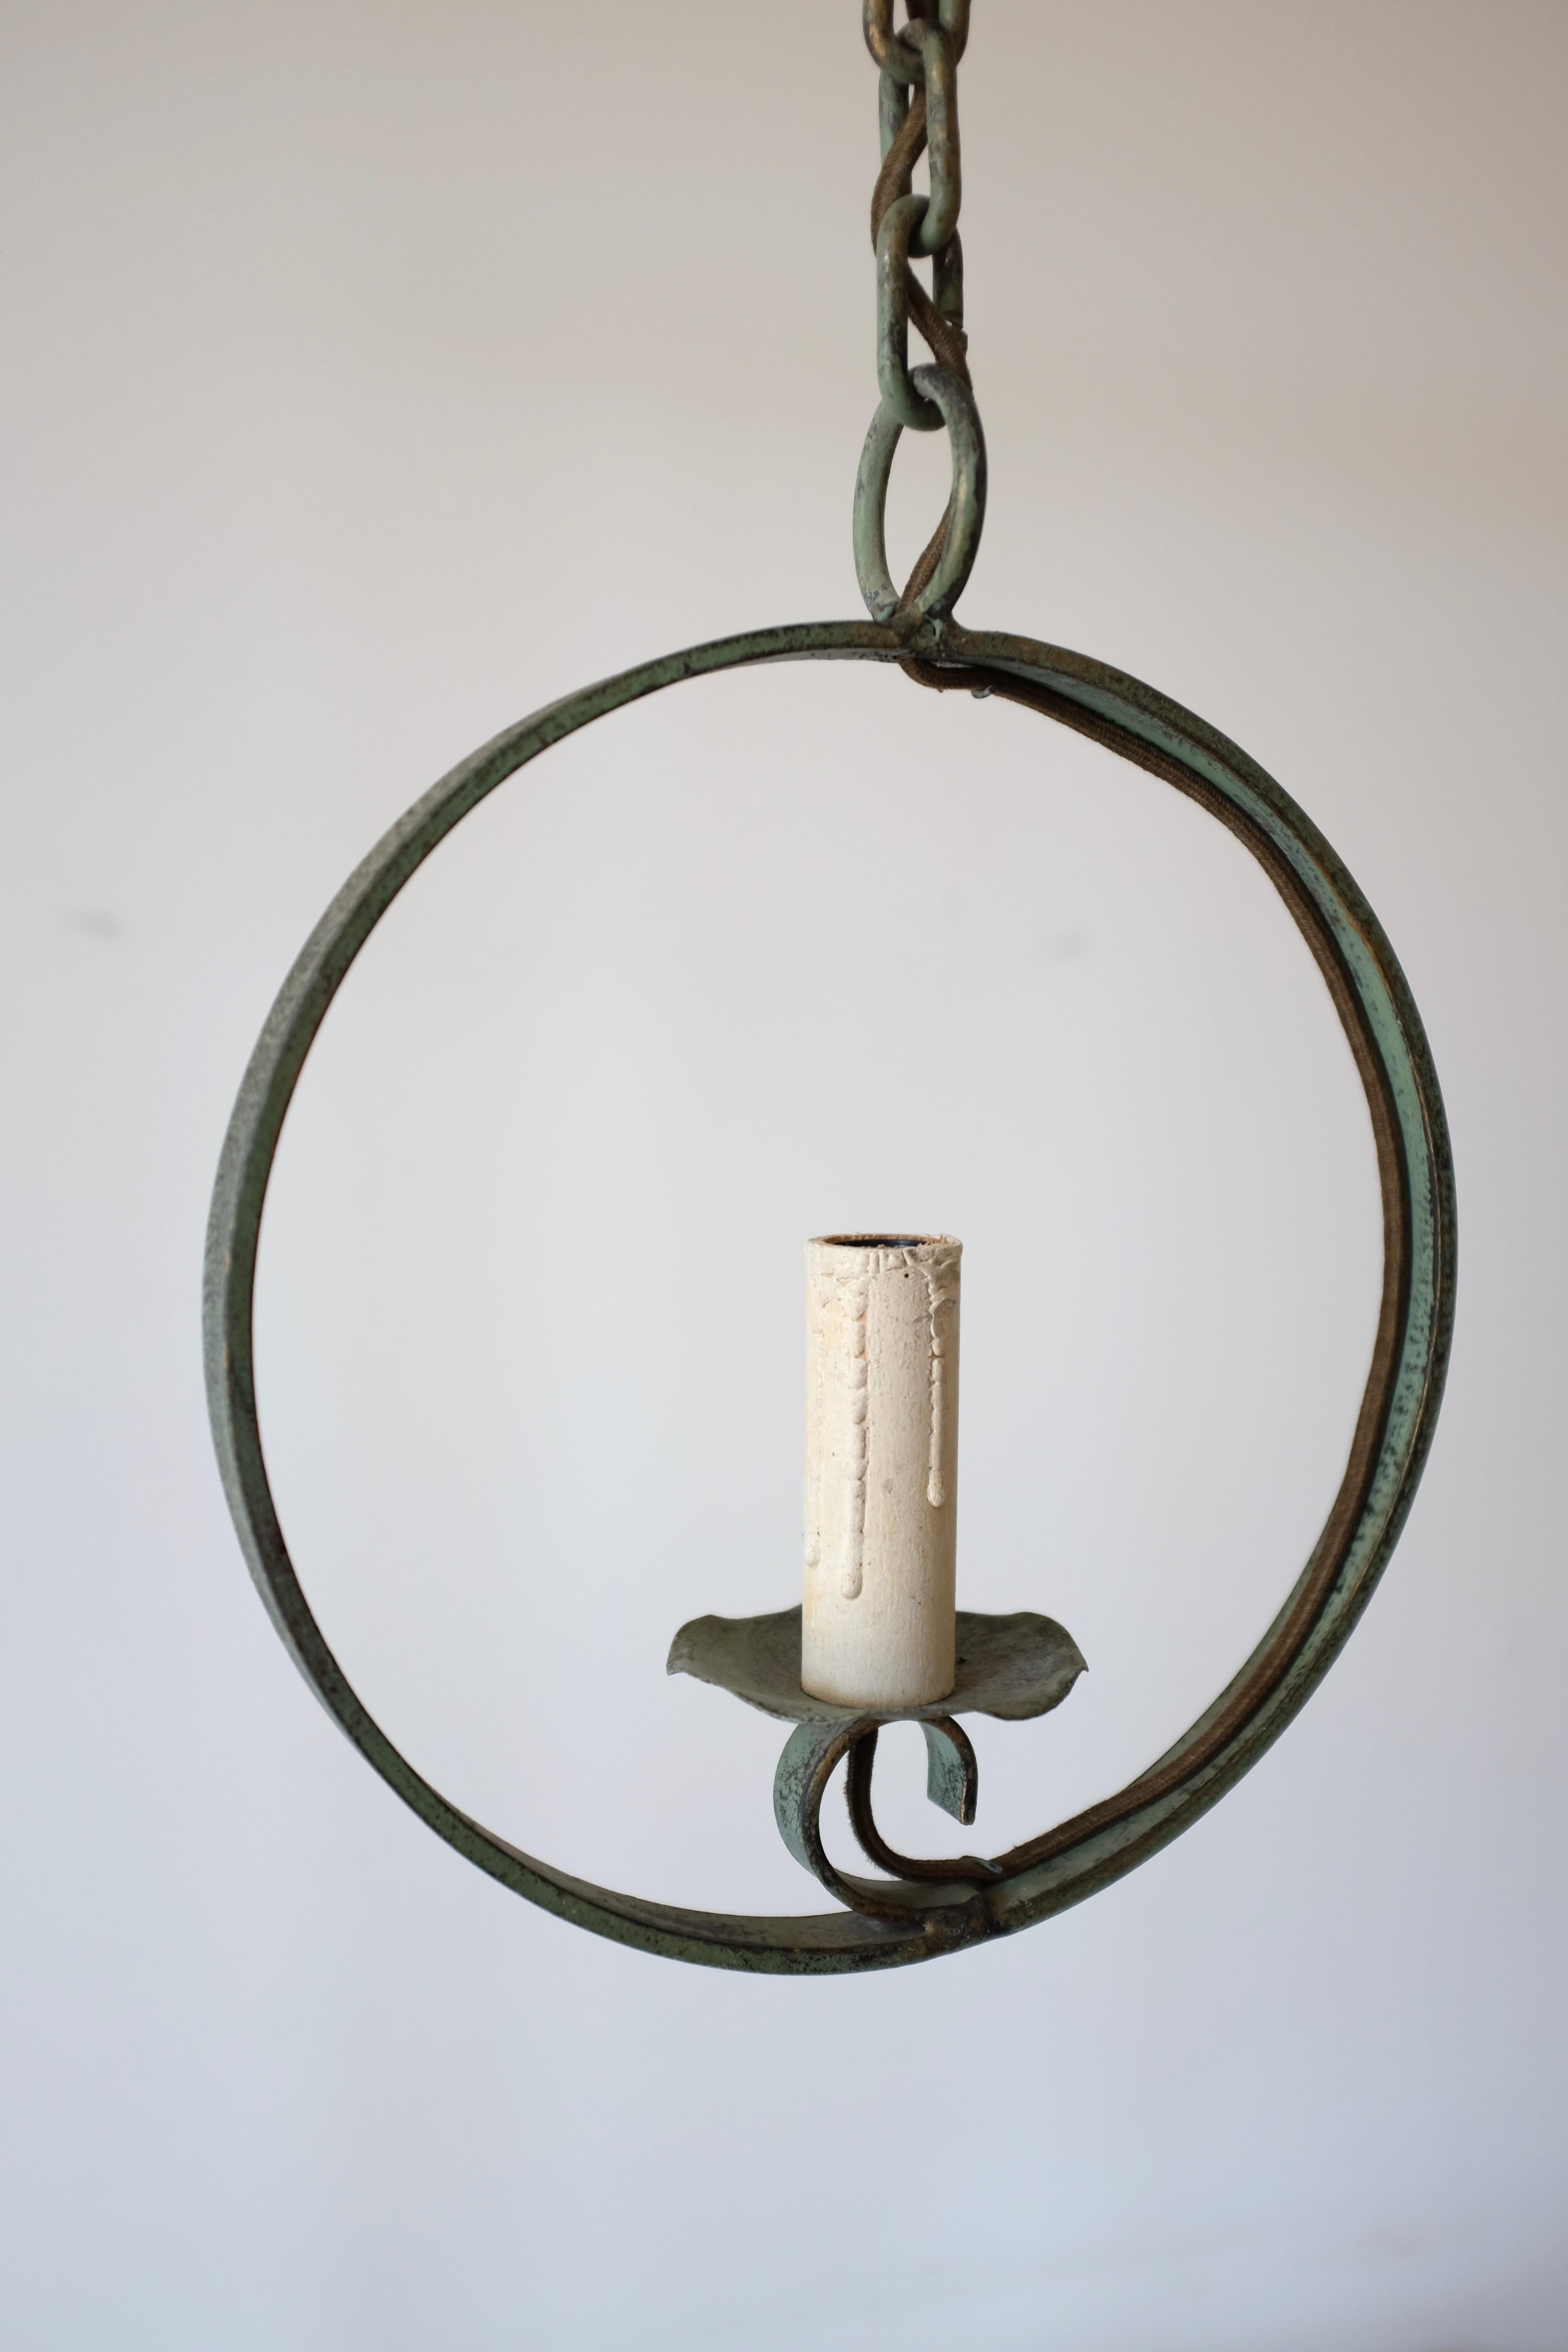 Charming 1950s outdoor pendant in the shape of a candle light within a circle. In a green metal with beautiful patina and organic details in the shape of a leaf around the lamp holder. In a good vintage condition with original wiring not tested, get